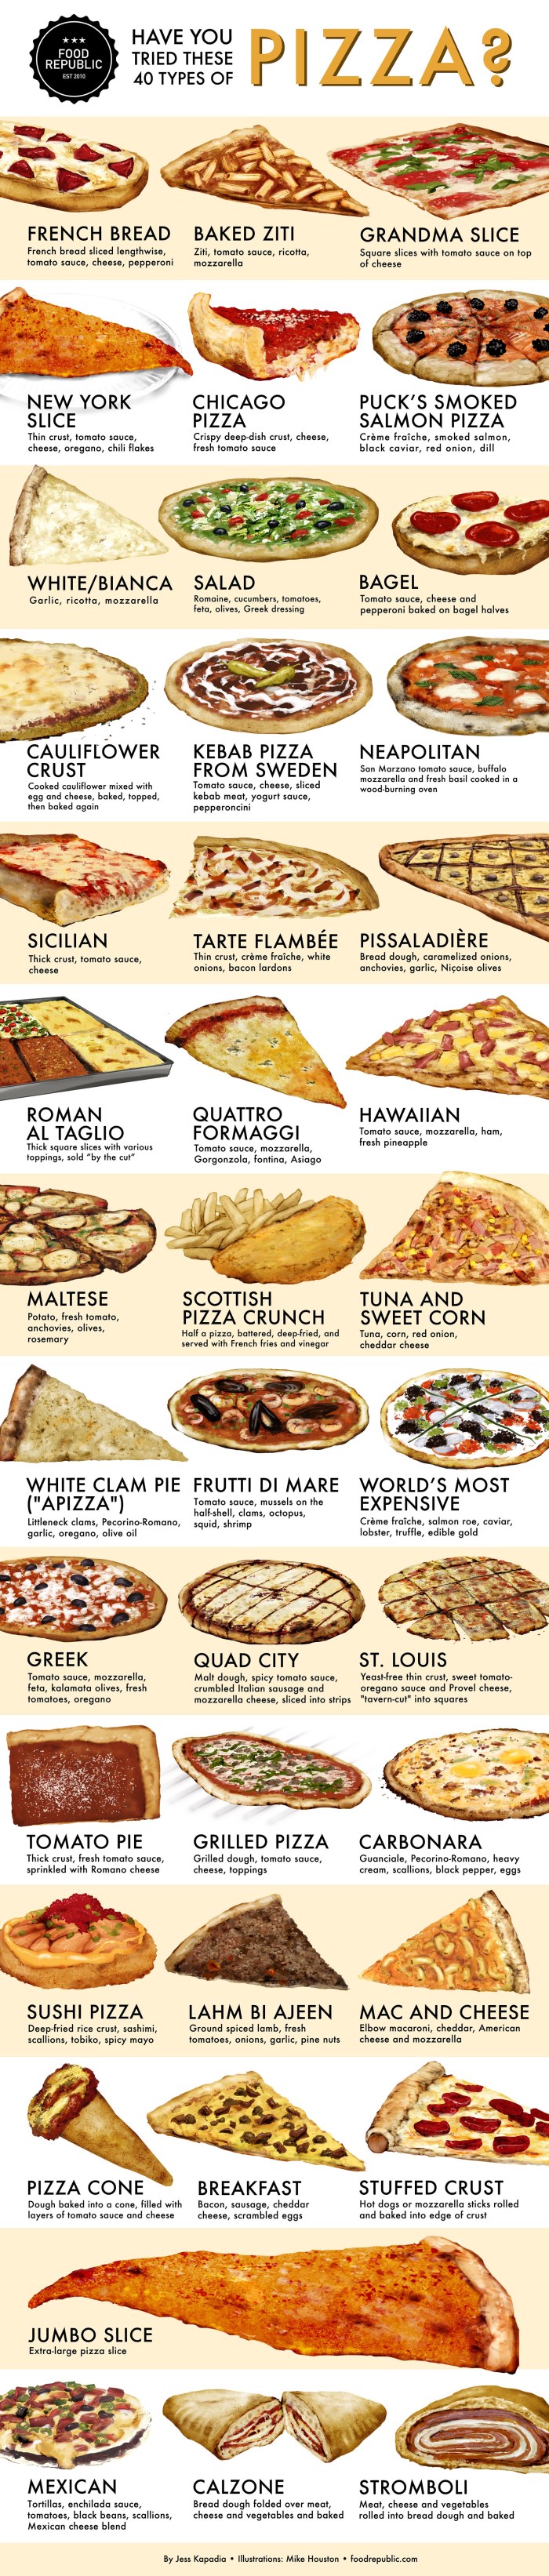 40 Types of Pizzas